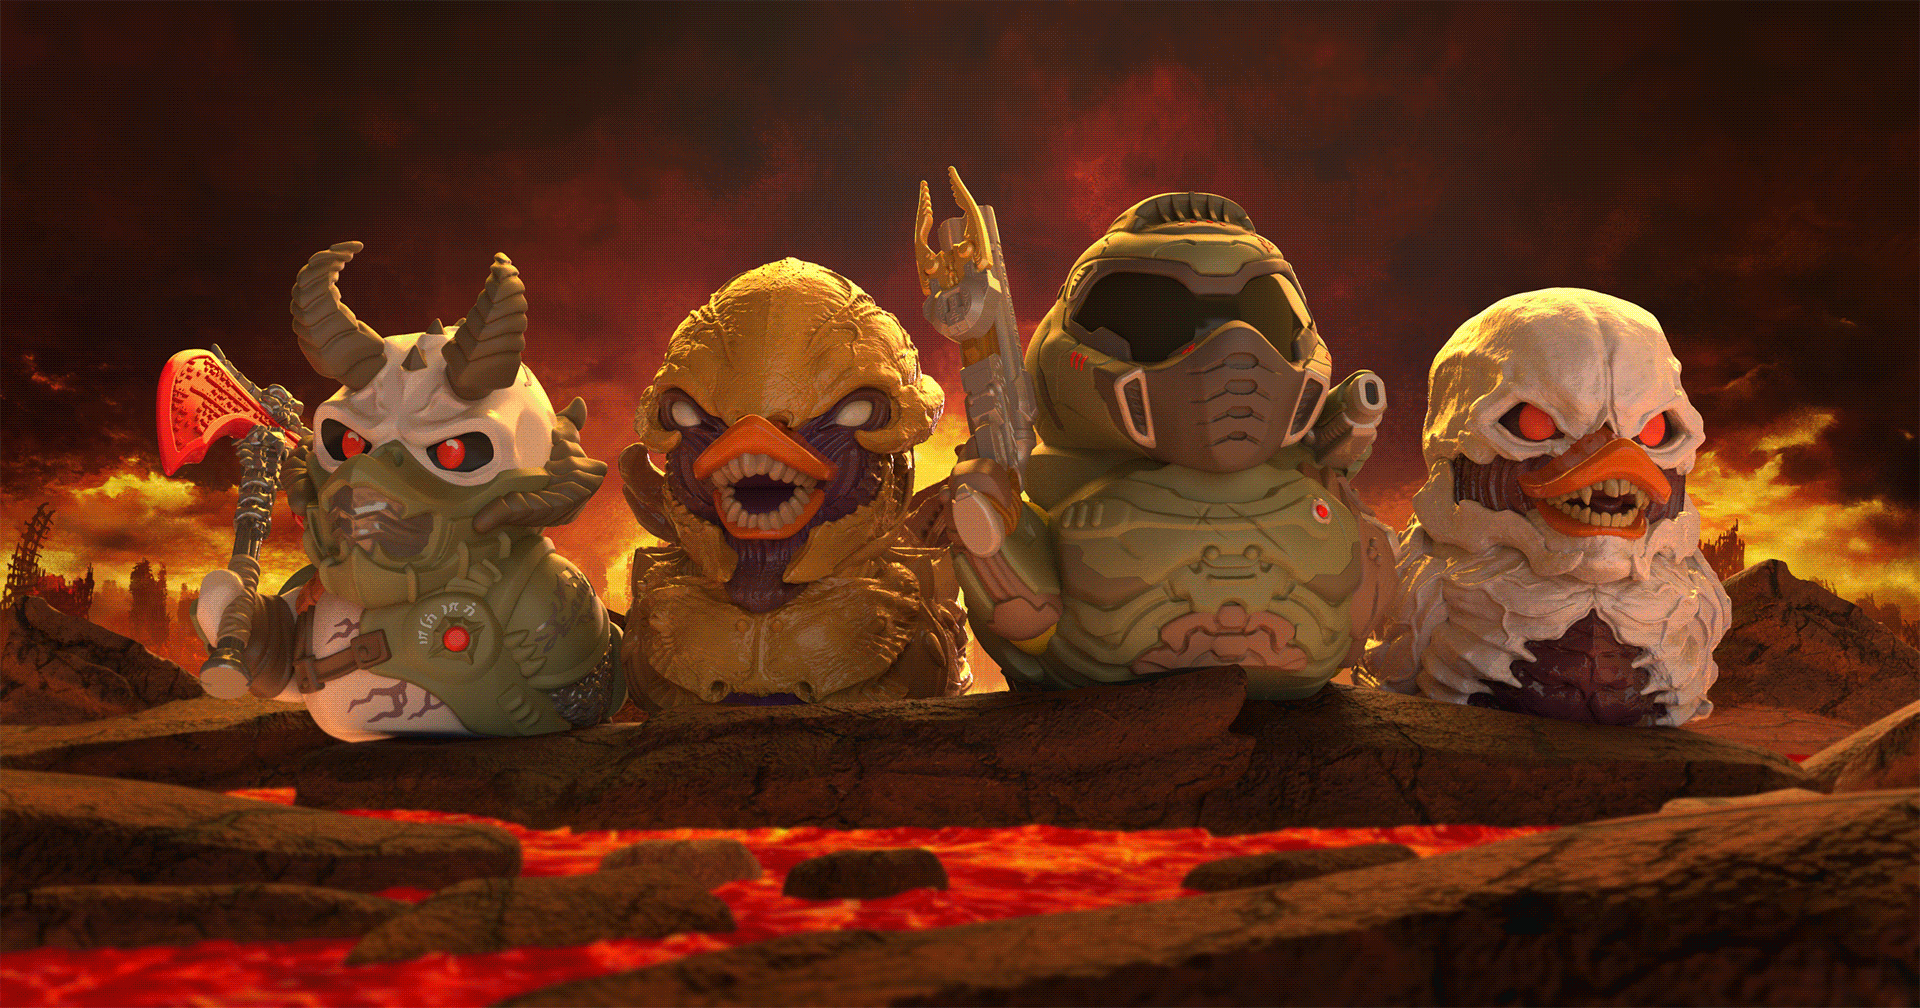 Video Game Characters As Horrific Rubber Ducks